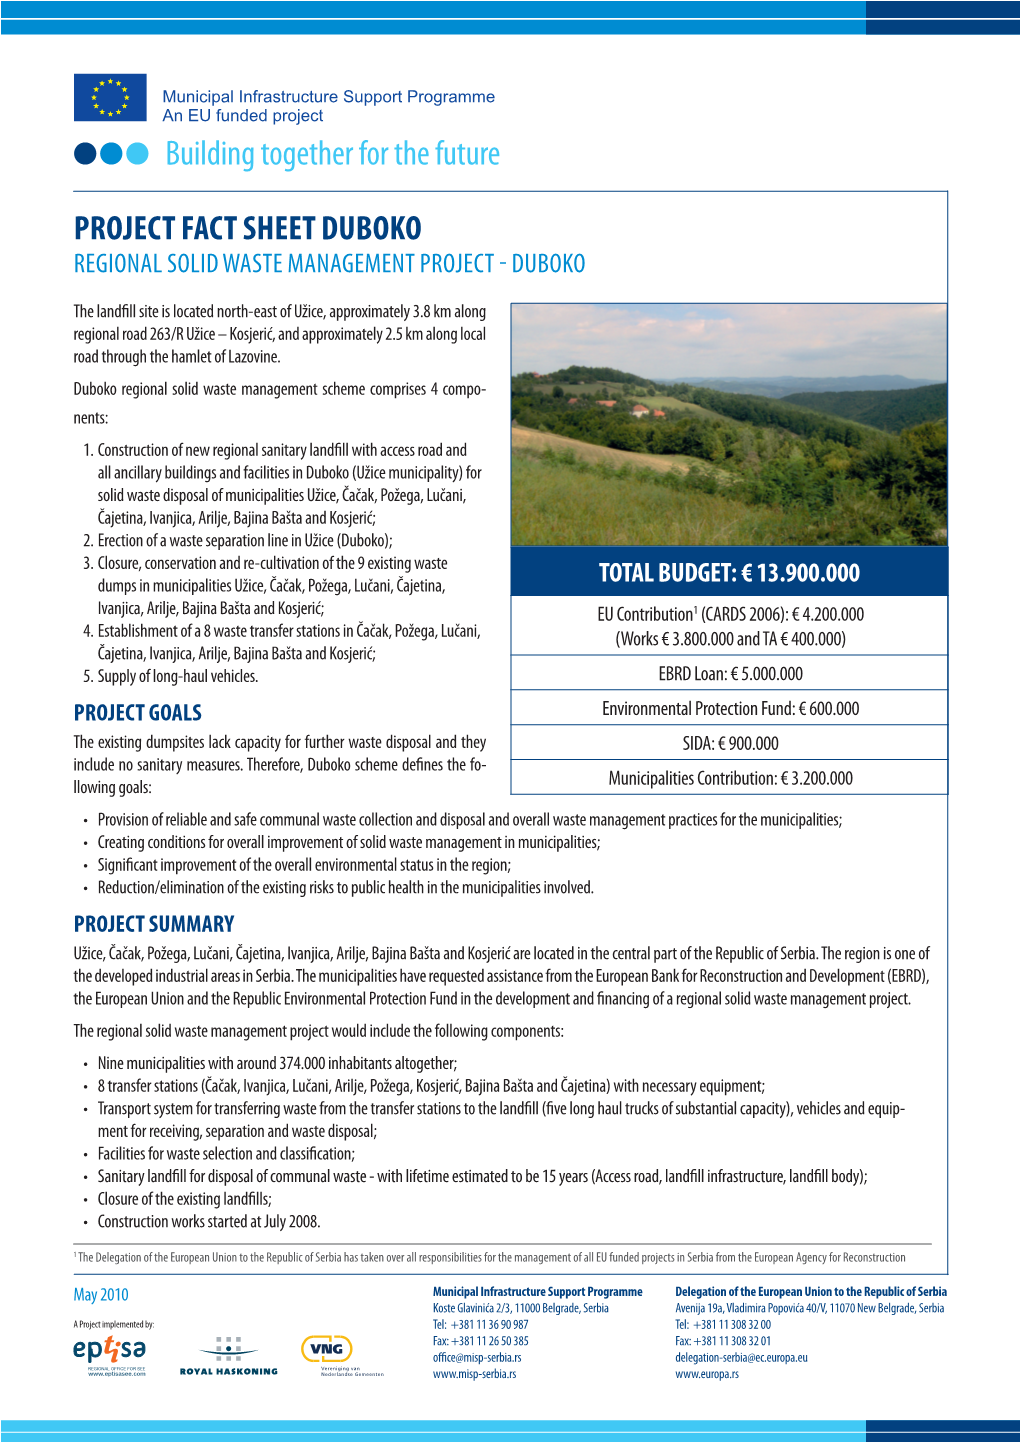 Project Fact Sheet Duboko Regional Solid Waste Management Project - Duboko